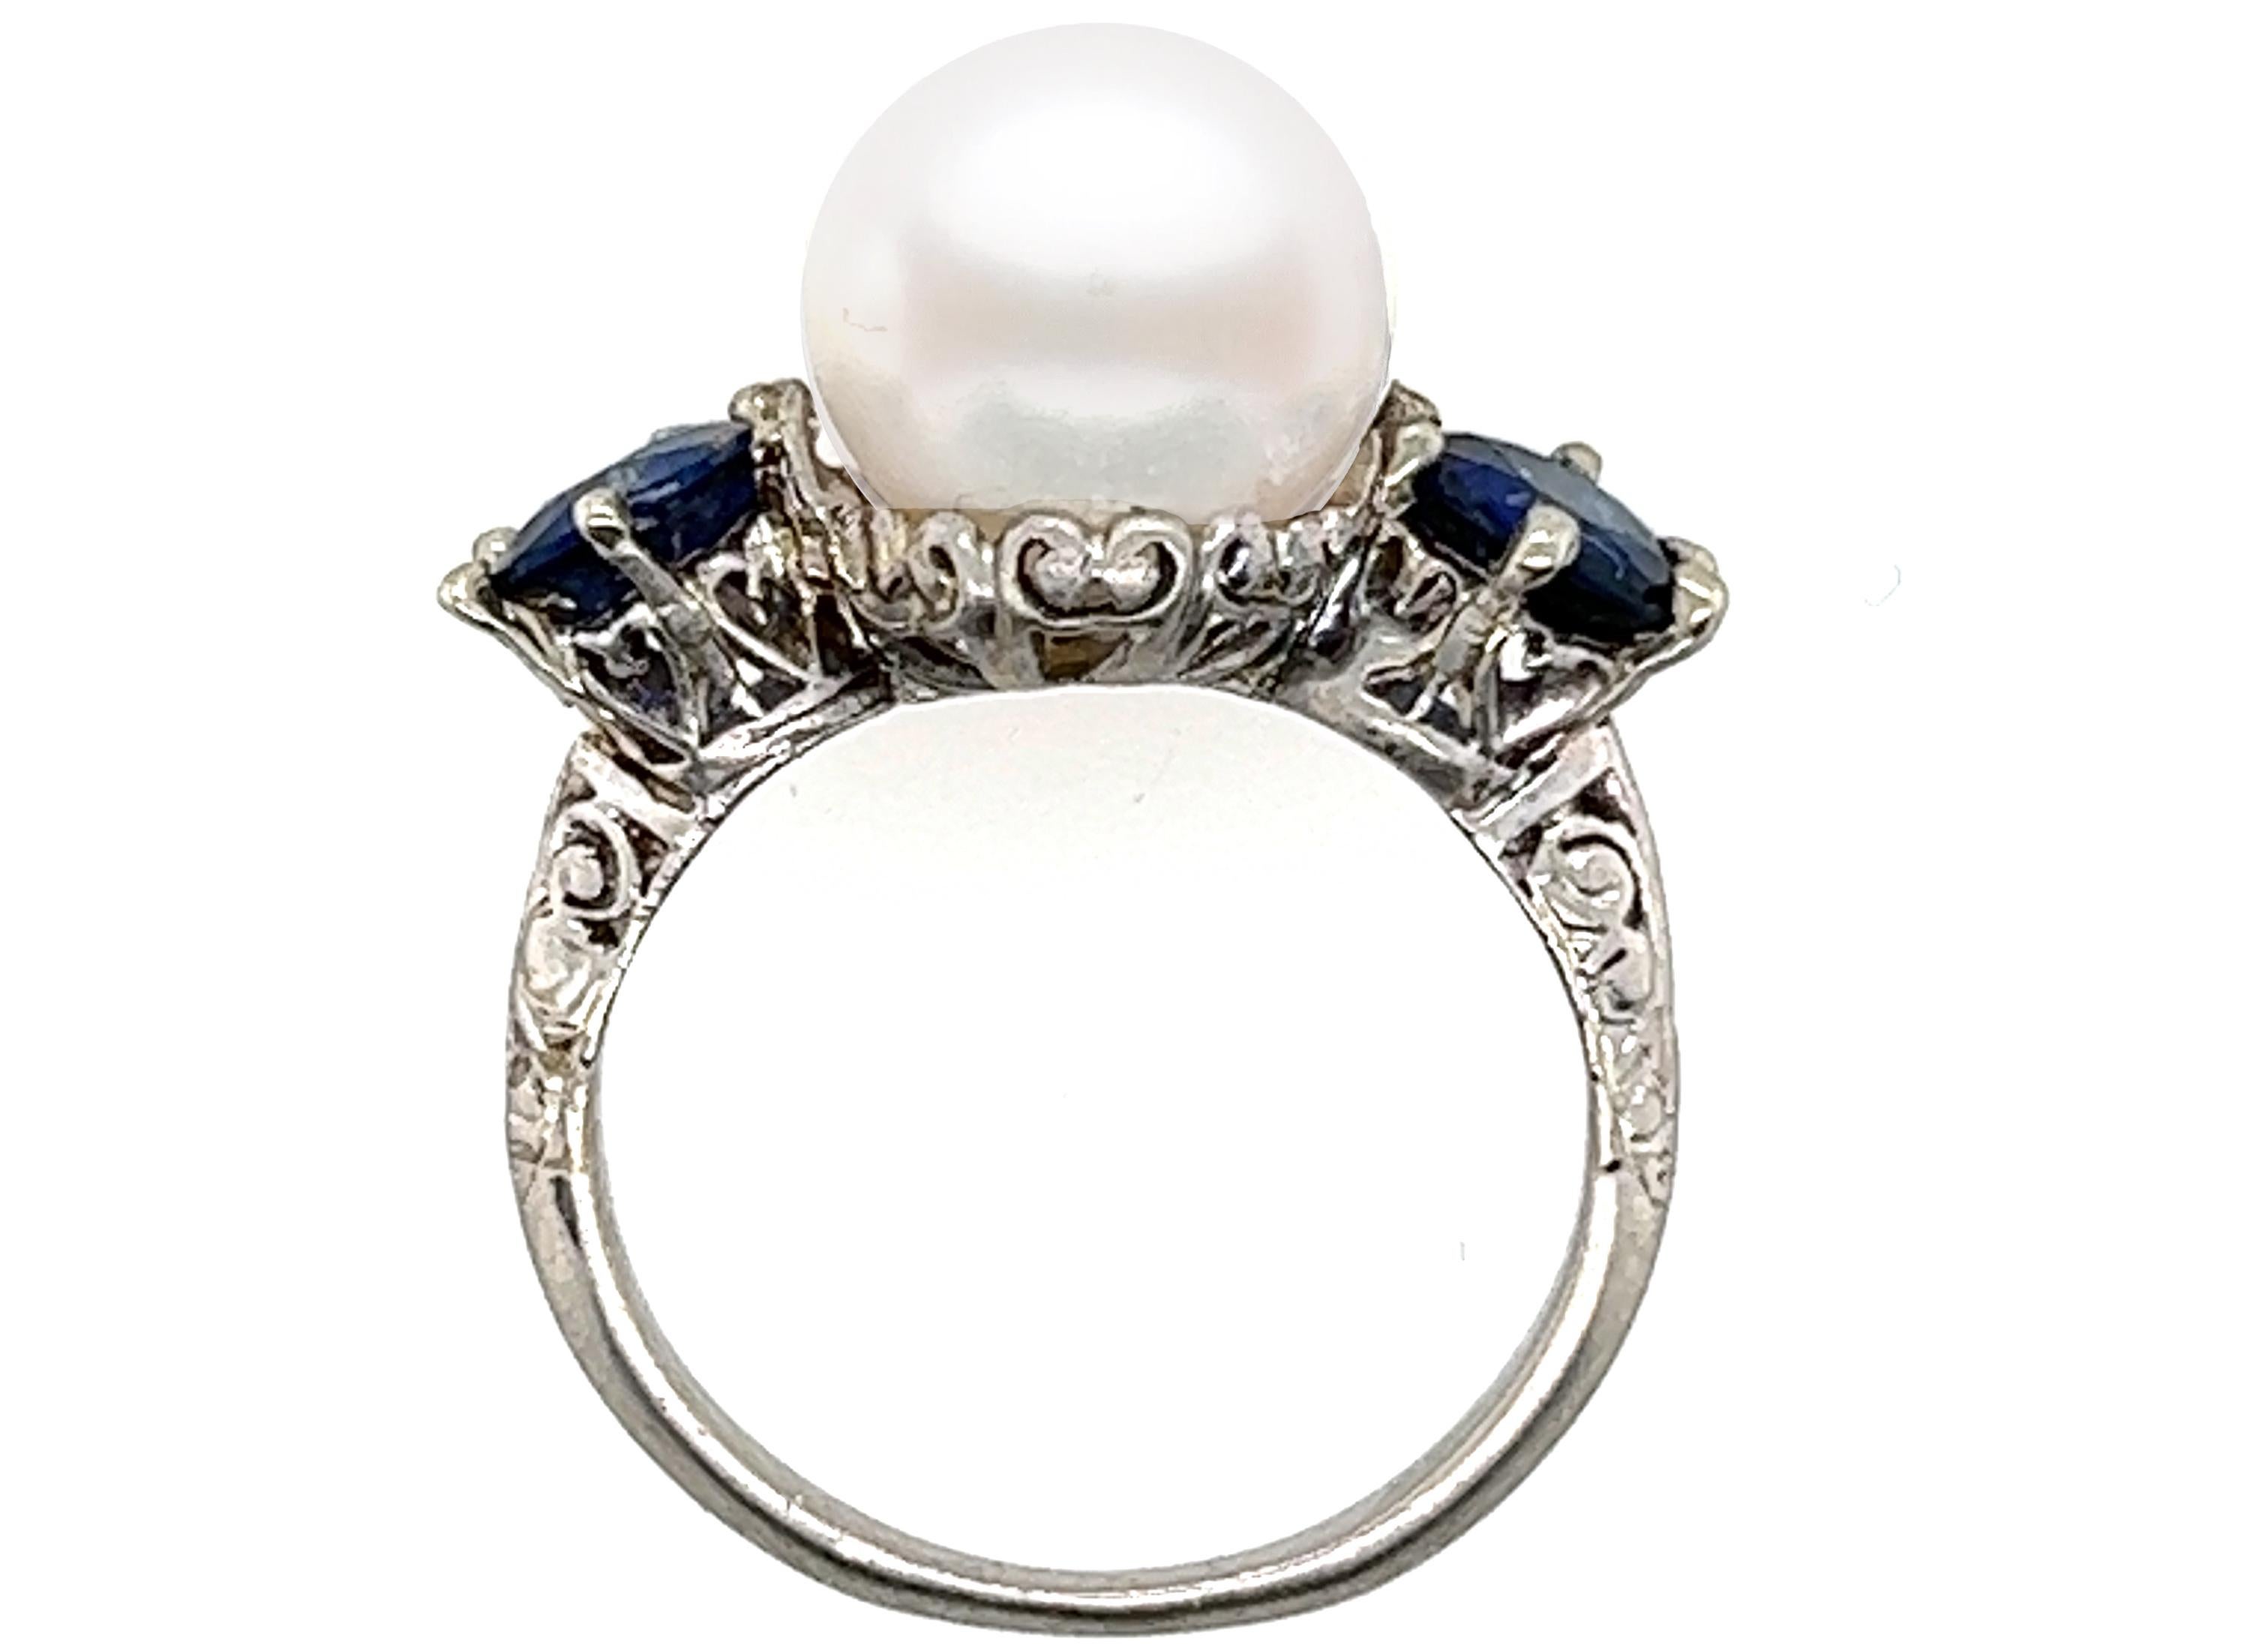 Genuine Original Antique from 1900s Pearl 1.45ct Sapphire Platinum Edwardian 3 Stone Engagement Ring 



Featuring a Gorgeous Genuine Natural 10.5mm Gem Pearl Center

Magnificent Sapphires Caress the Sides 

Artful Engraving Intensely